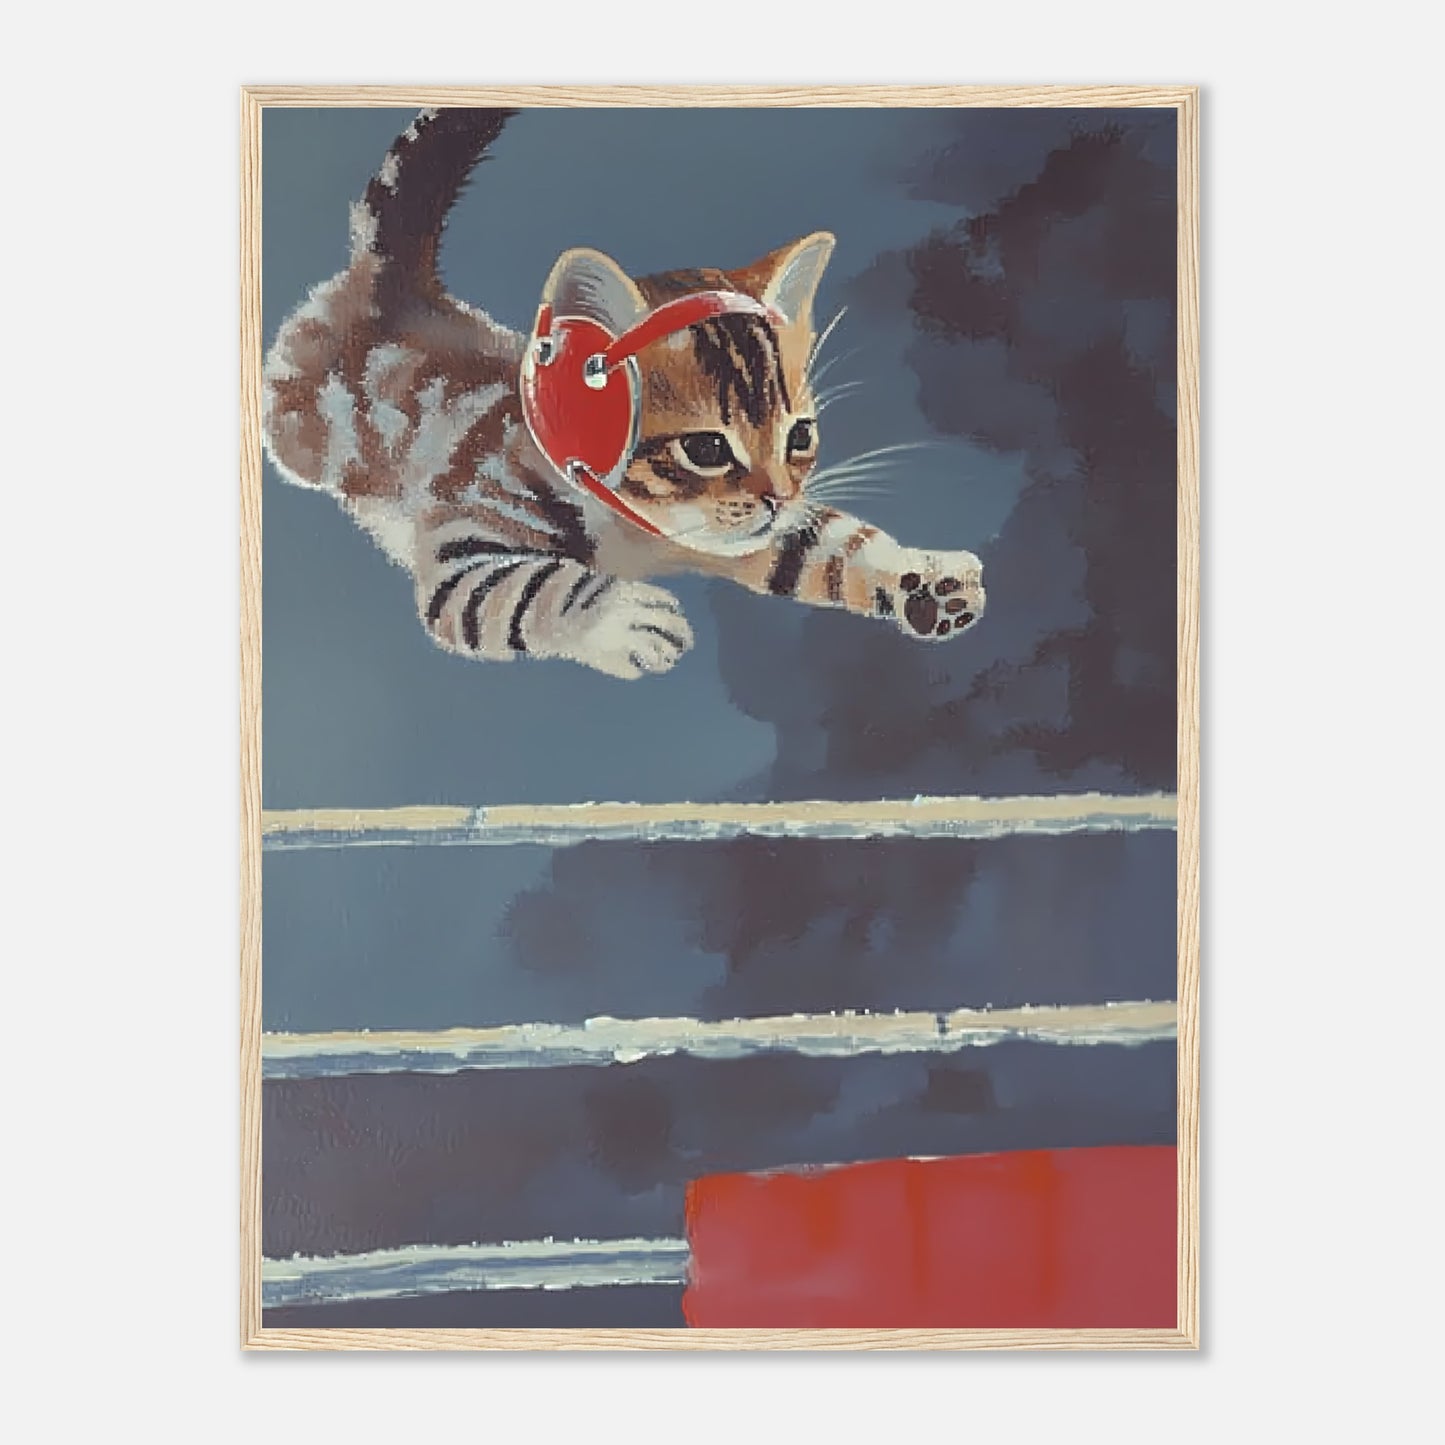 A painting of a cat with headphones leaping in the air against a blue background.